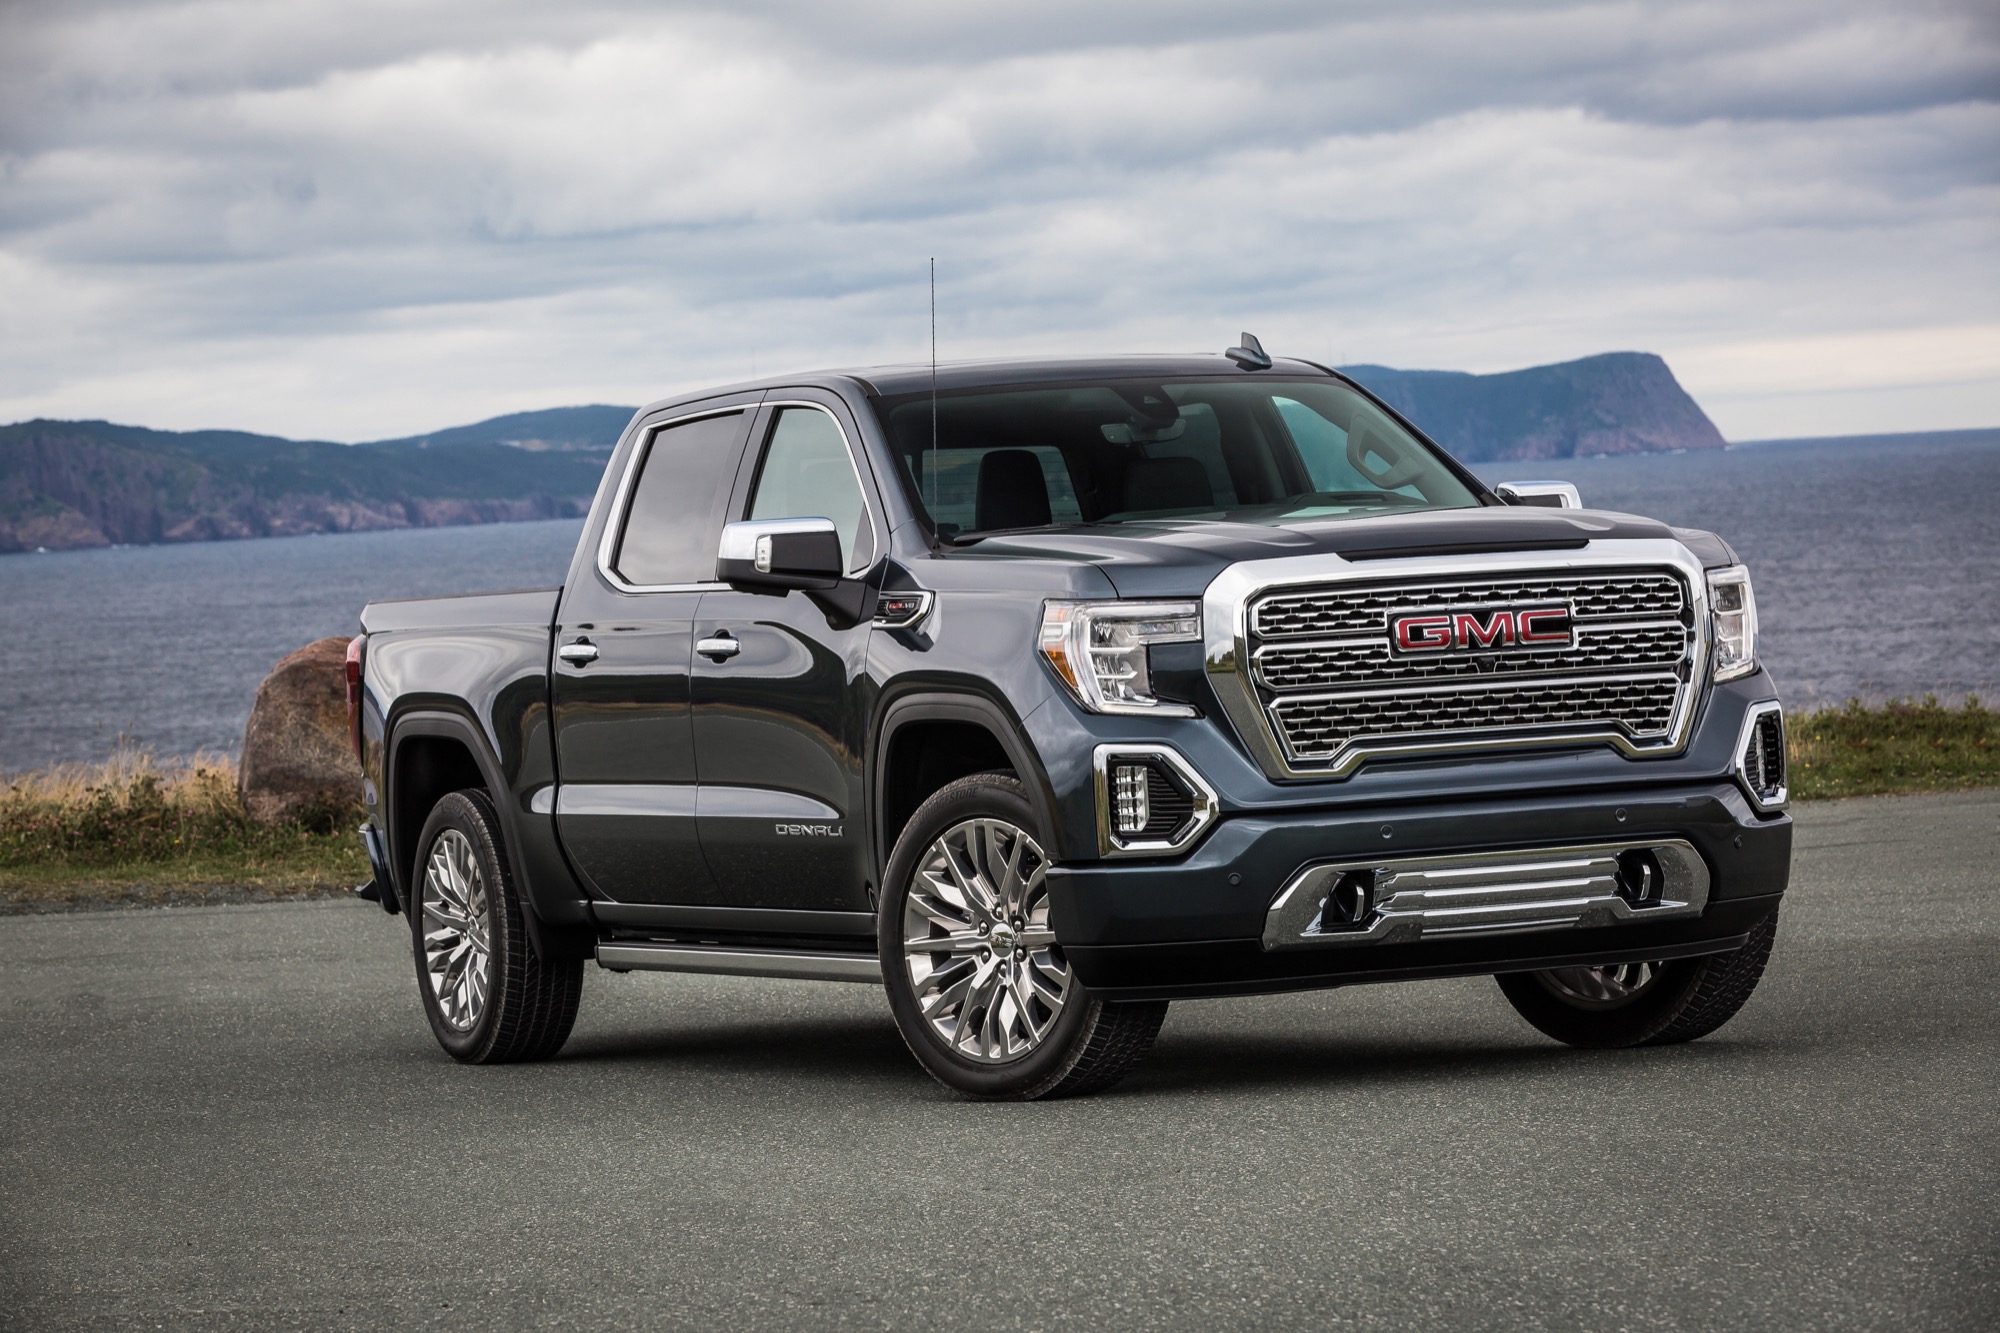 Refreshed 2022 GMC Sierra 1500 Delayed, Limited Model To Be Introduced